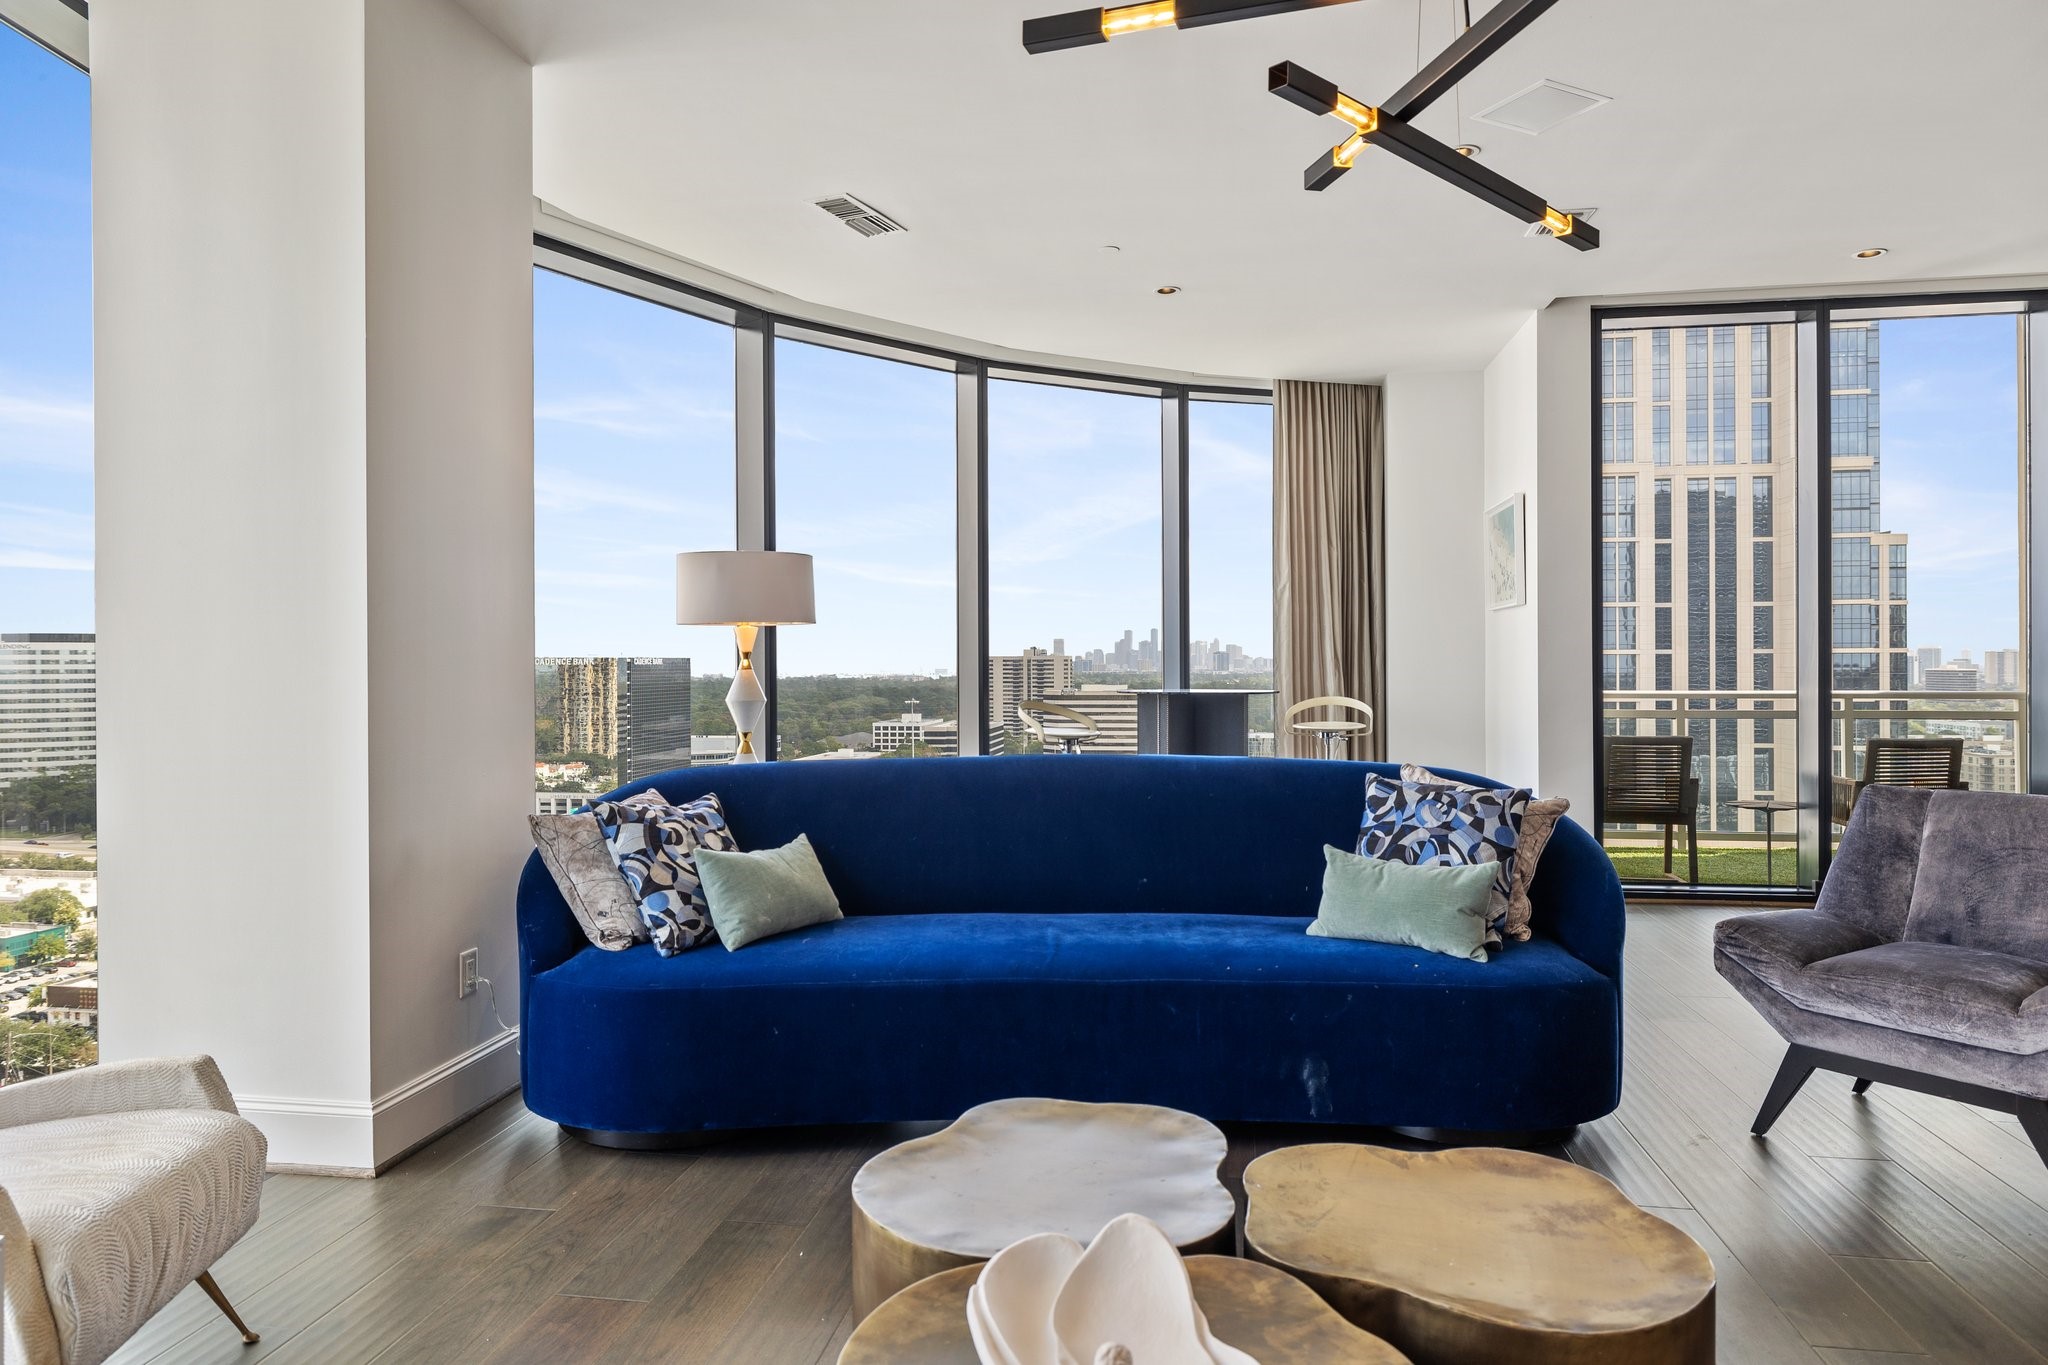 An interior overlooking the cityscape with the Post Oak Hotel in the distance, complemented by a mix of neutral and vibrant tones on the walls and decor.